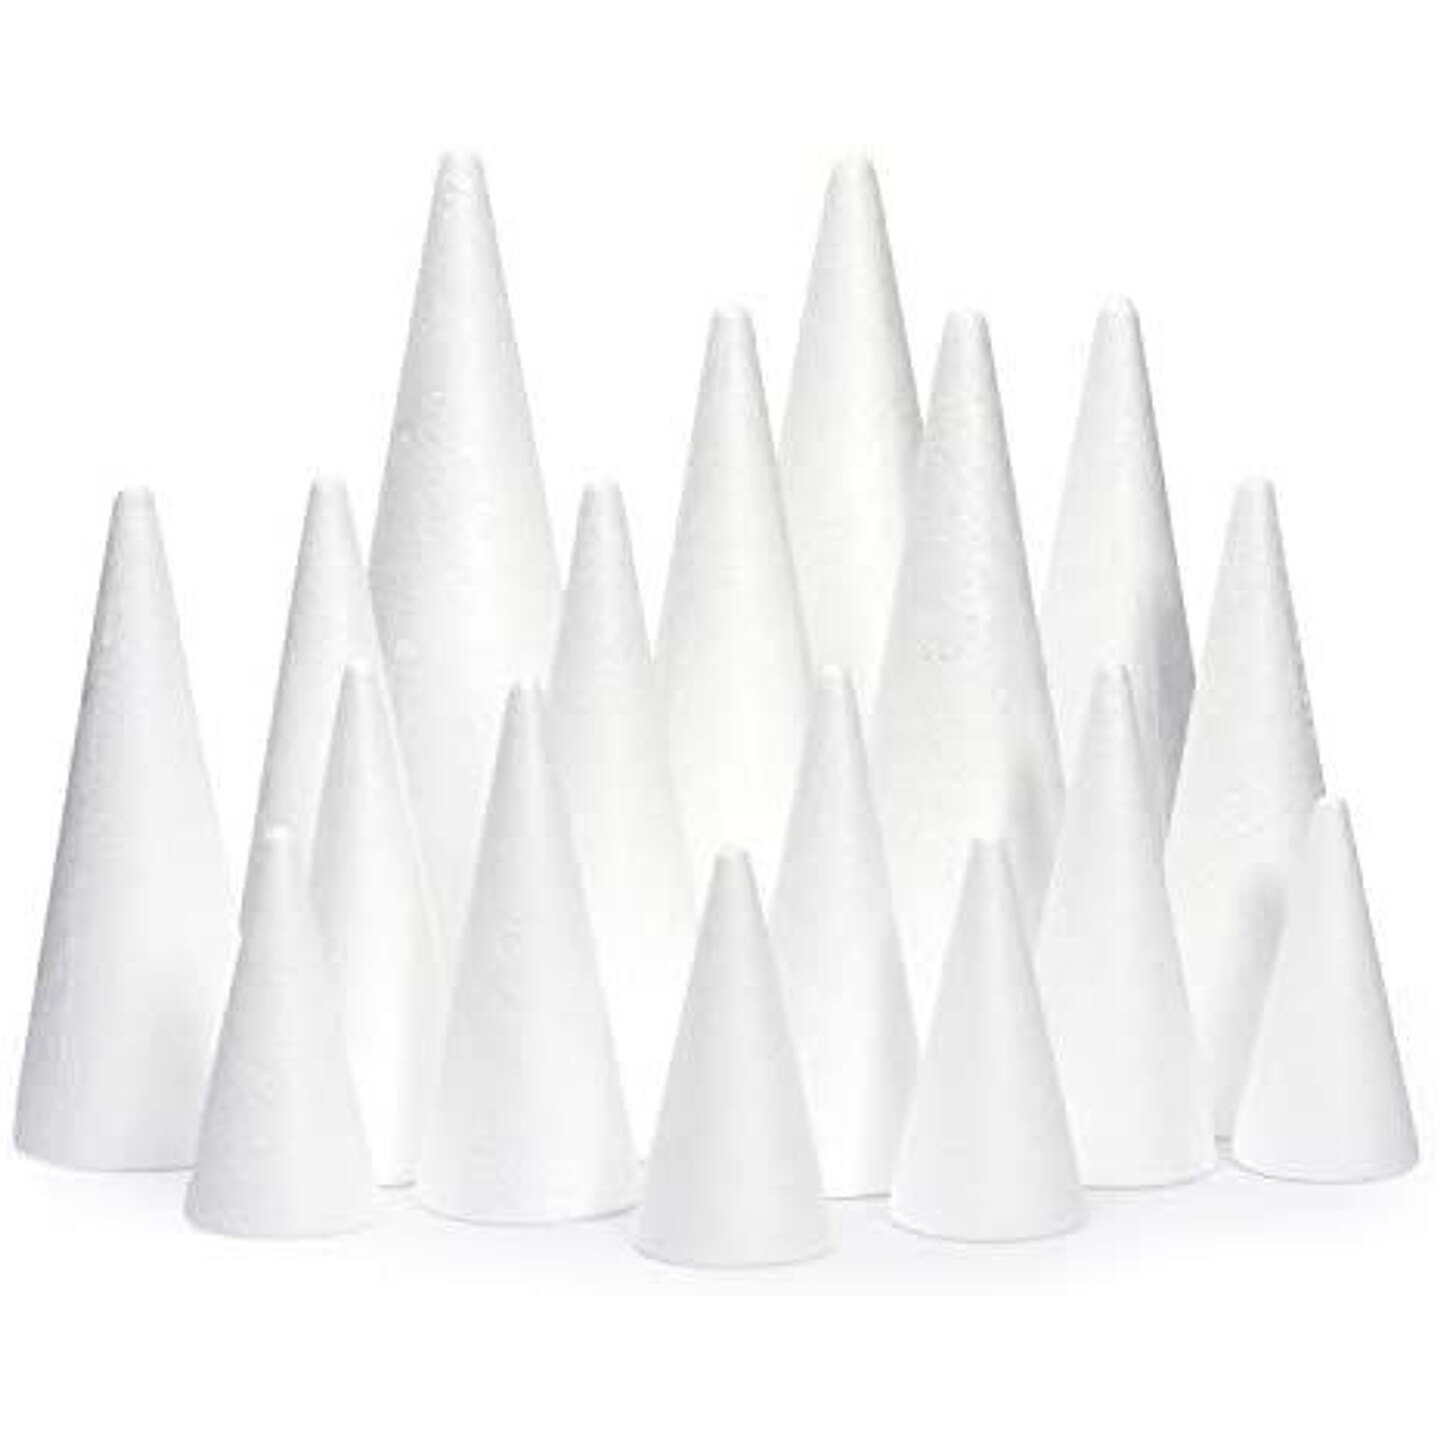 4 Pack Craft Foam - Foam Cones for Crafts, Trees, Holiday Gnomes